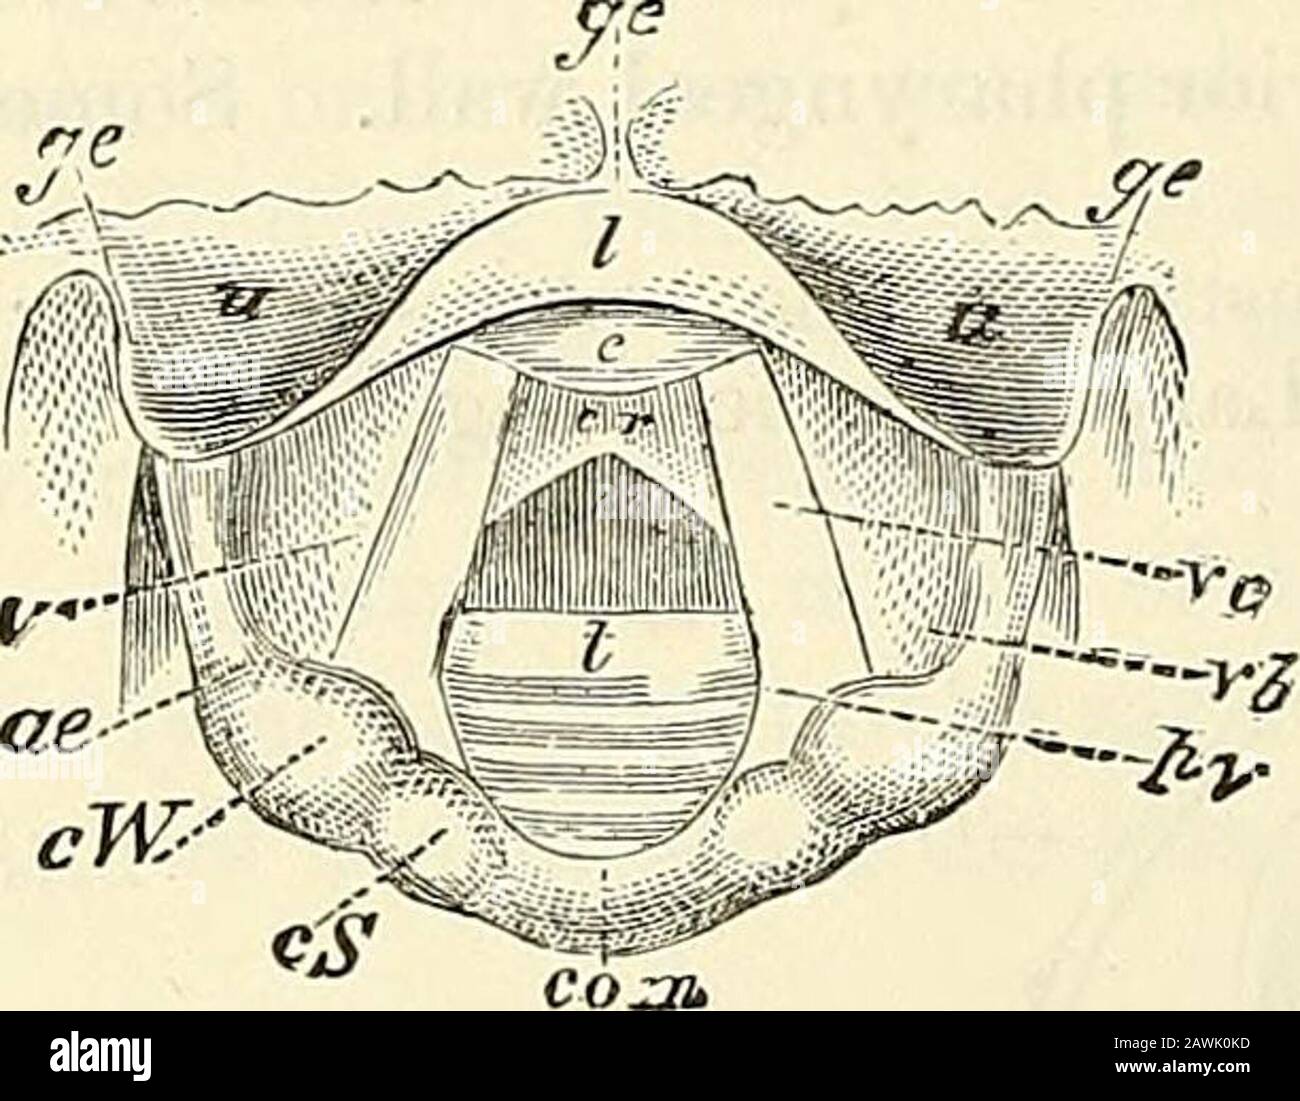 A system of surgery : theoretical and practical . The small escrescence situated on the right vocal cord (b) laight befalsely supposed to be on the left from the appearance presented inthe mirror (A). 660 DISEASES OF THE LARYNX. Fig. 148.. ge, Glosso-epiglottic folds ; w, uppersurface ; I, lip ; c, cushion of epiglot-tis ; V, ventricle of larynx; ree, ary-epiglottic fold ; cTF, cartilage ofWrisberg ; cS, capitulum Santorini;com, arytenoid commissure ; vc, vocalcord ; th, ventricular band ; py, pro-cessus vocaUs ; ci cricoid cartilage;?, rings of trachea. sively brought into view; the base of Stock Photo